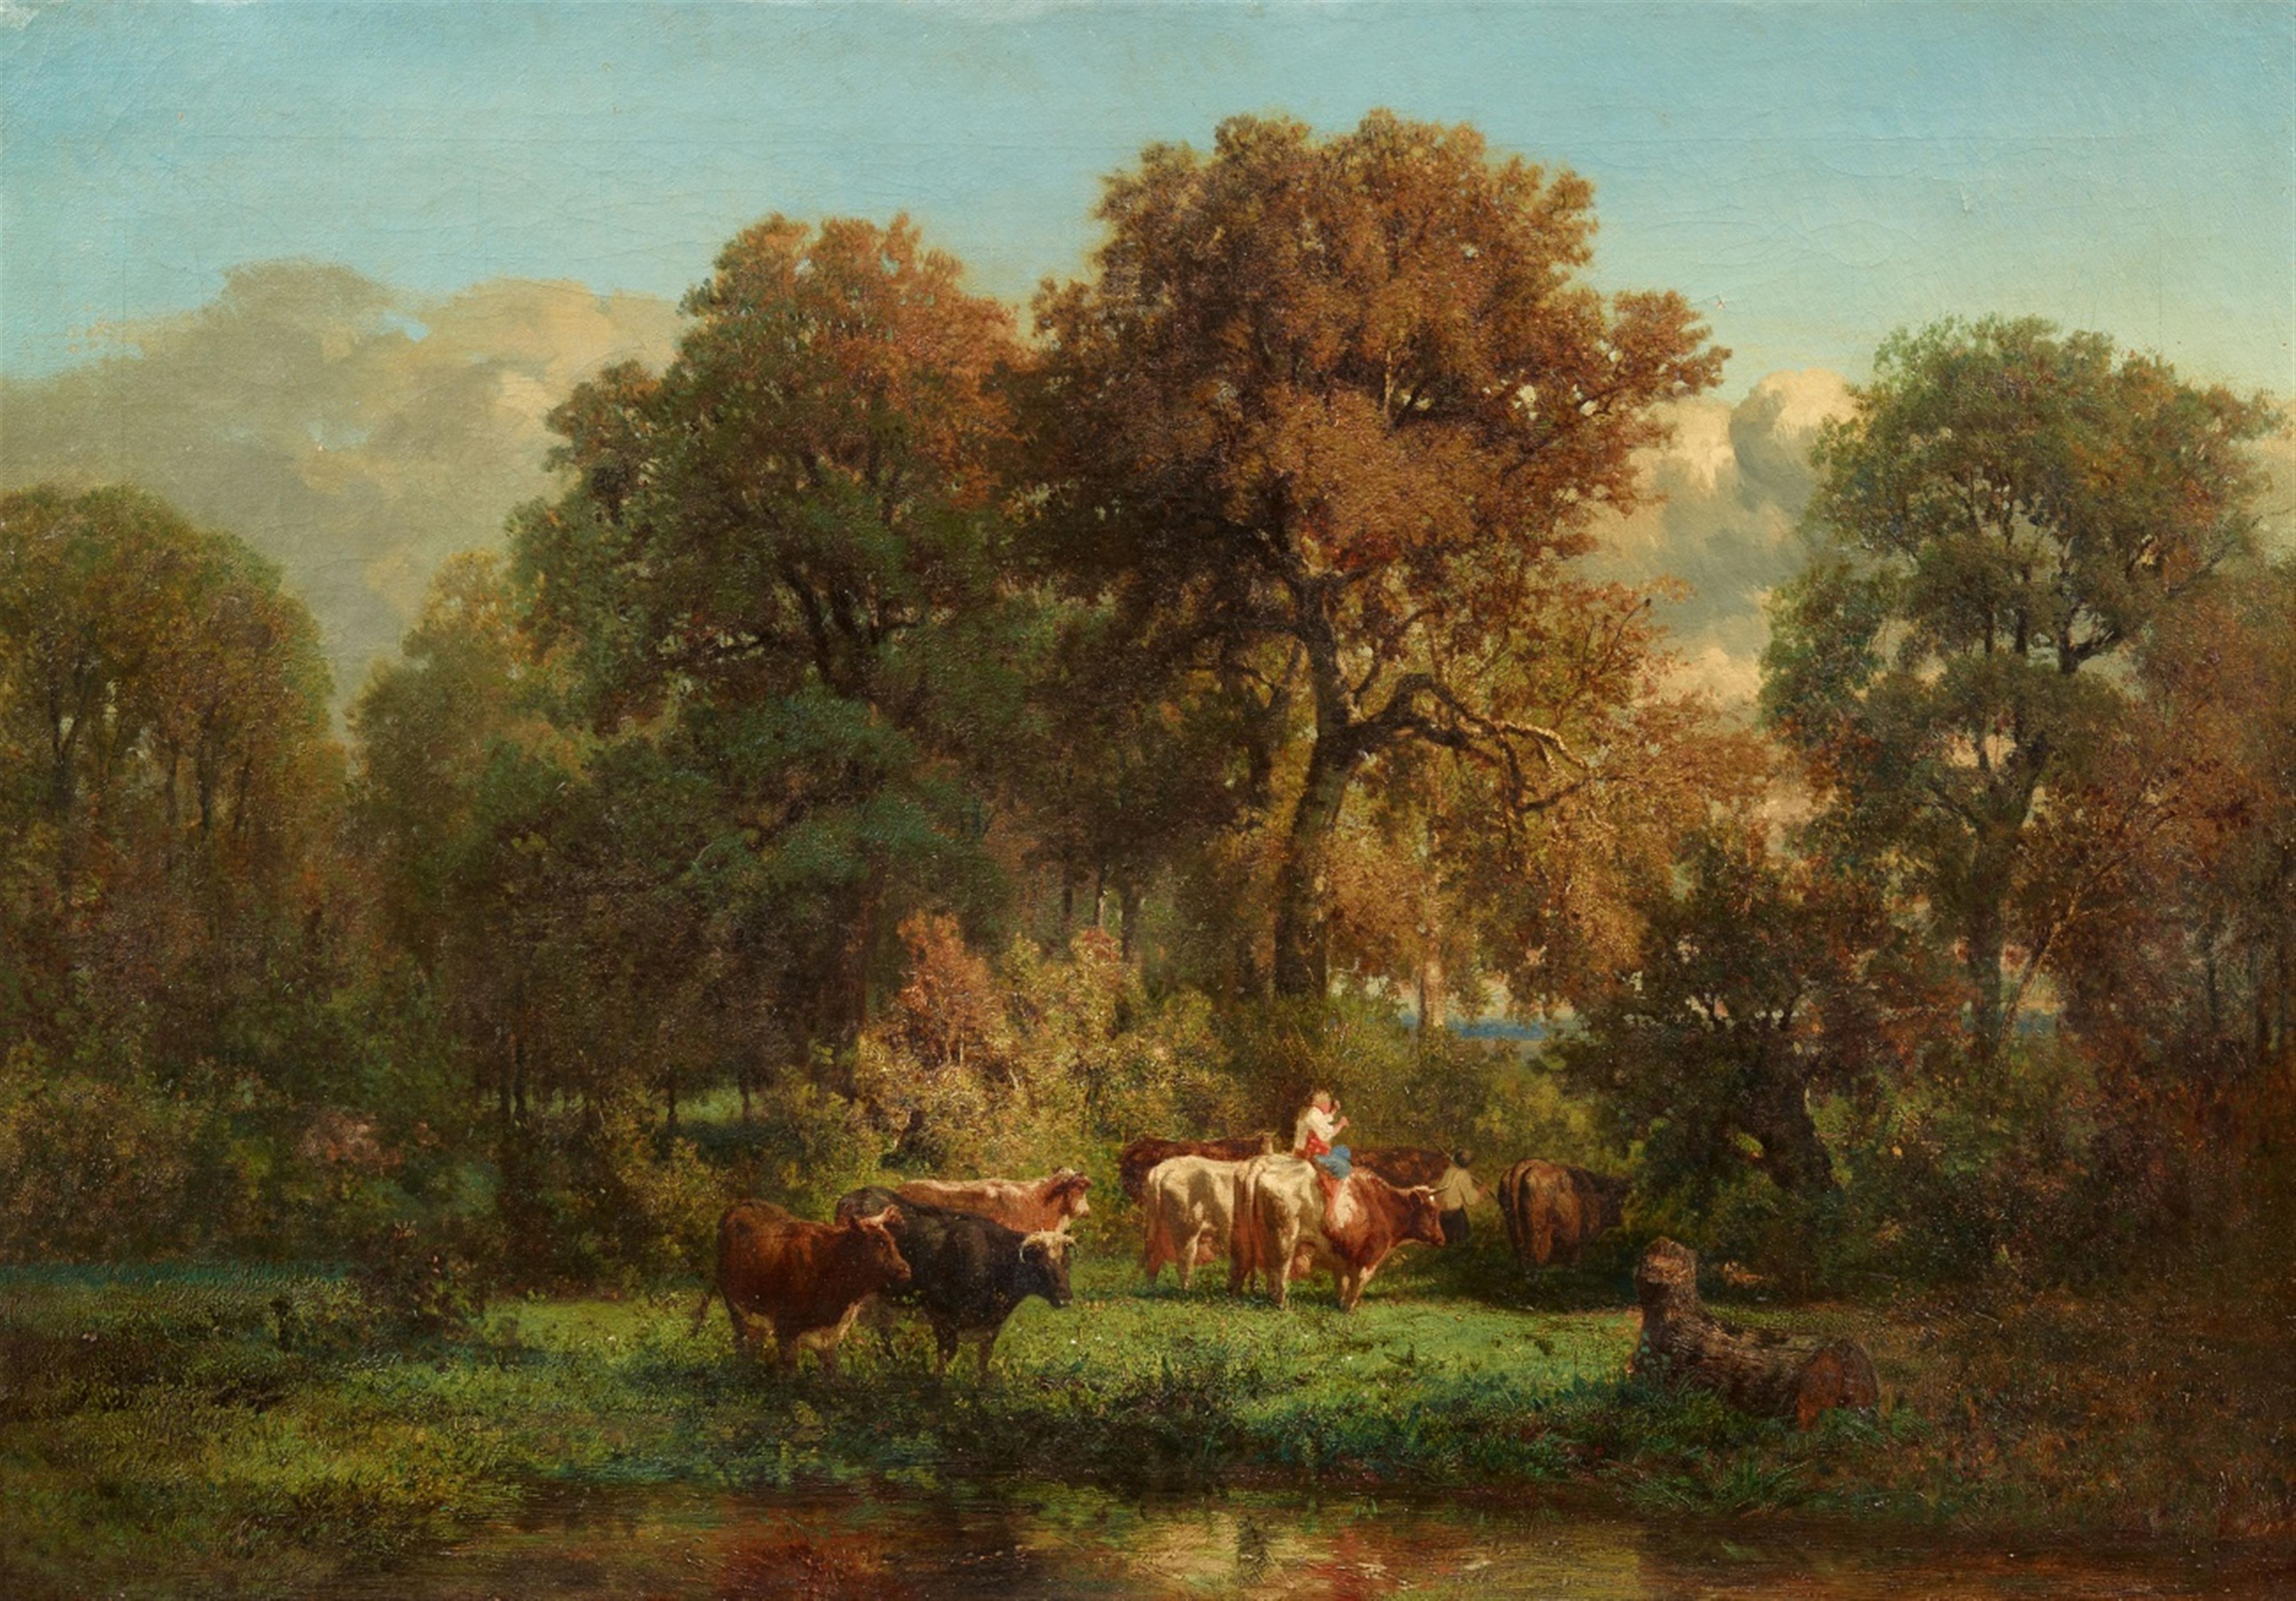 Troyon - Wooded Landscape with a Herd of Cattle - image-1